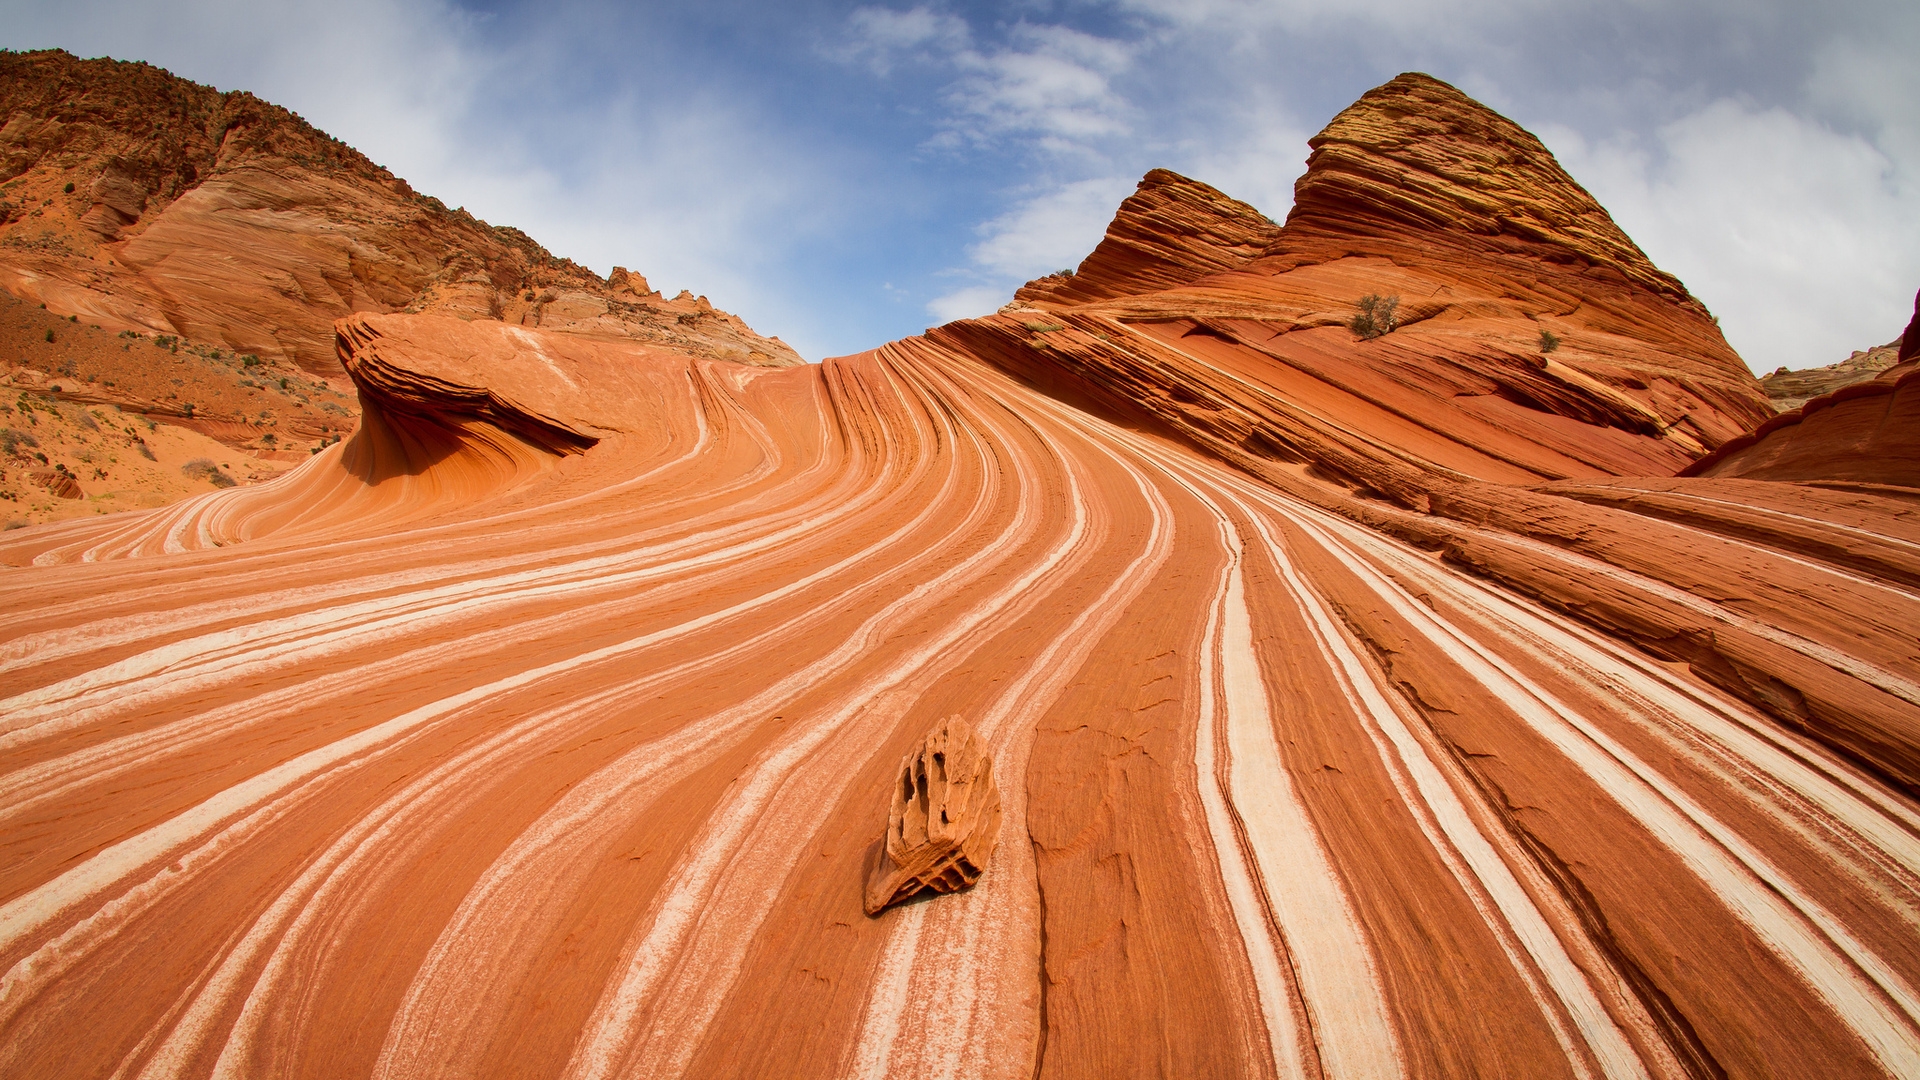 Coyote Buttes Arizona for 1920 x 1080 HDTV 1080p resolution